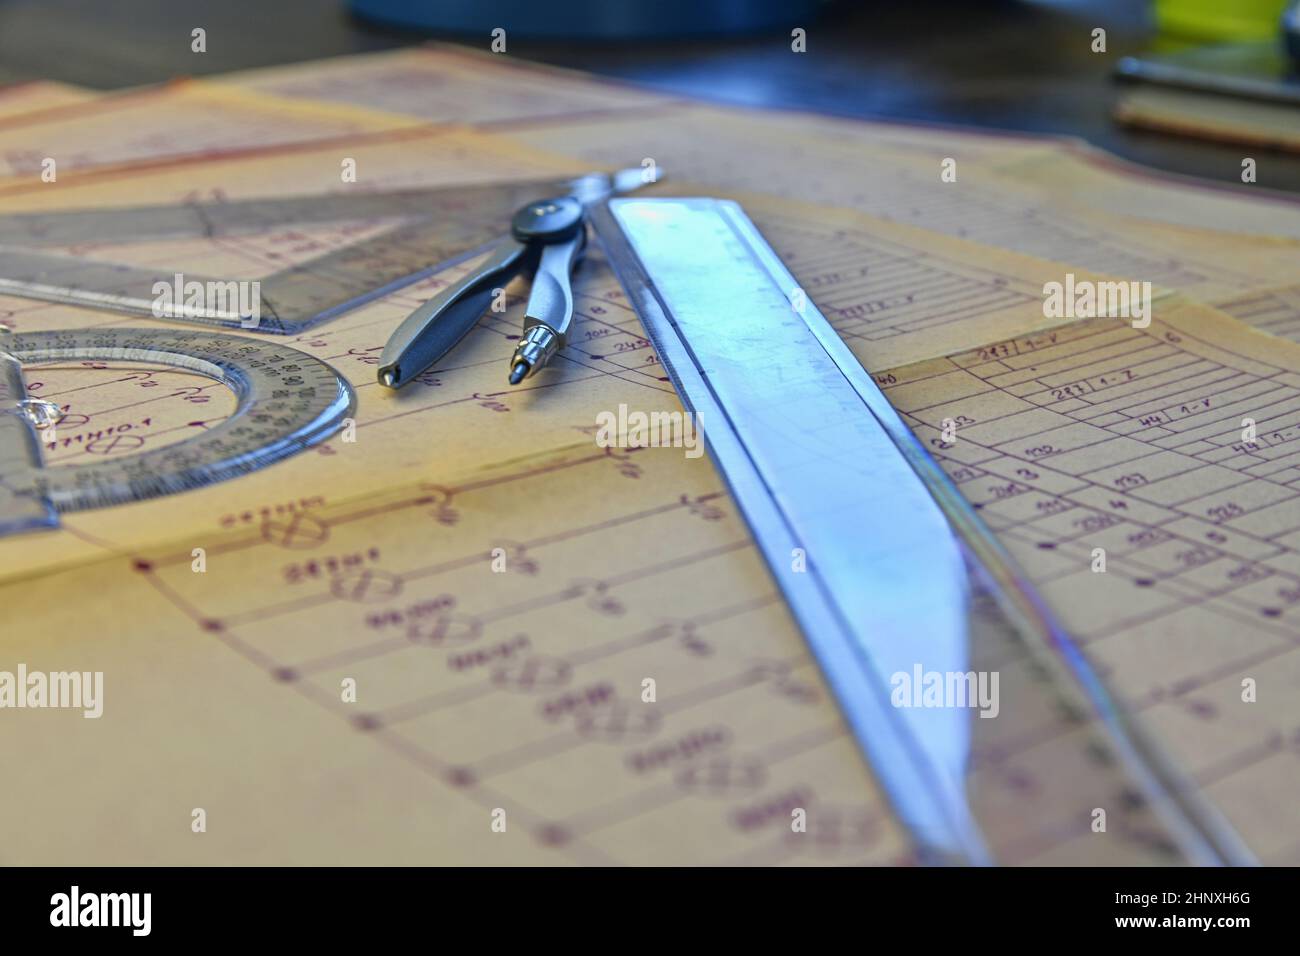 Electrical engineer workplace - electrotechnical project, rulers, and divider compass. Construction and electrotechnology concept. Engineering tools. Stock Photo